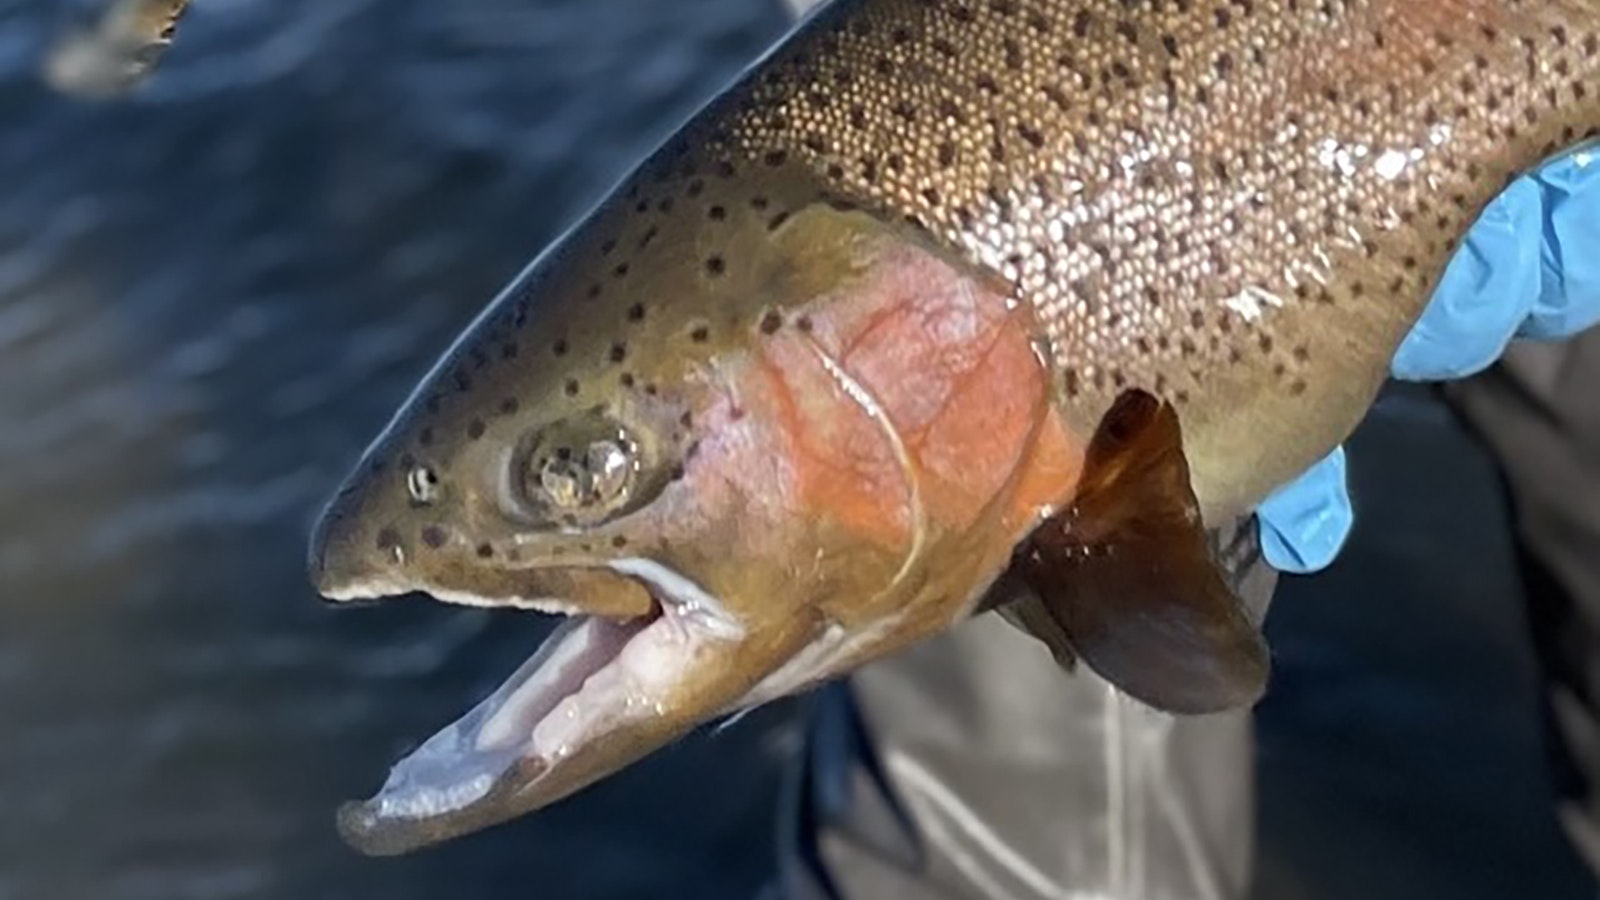 Fish hook injuries, such as this fish losing an eye, are becoming a concern on Wyoming’s prized North Platte River fisheries.